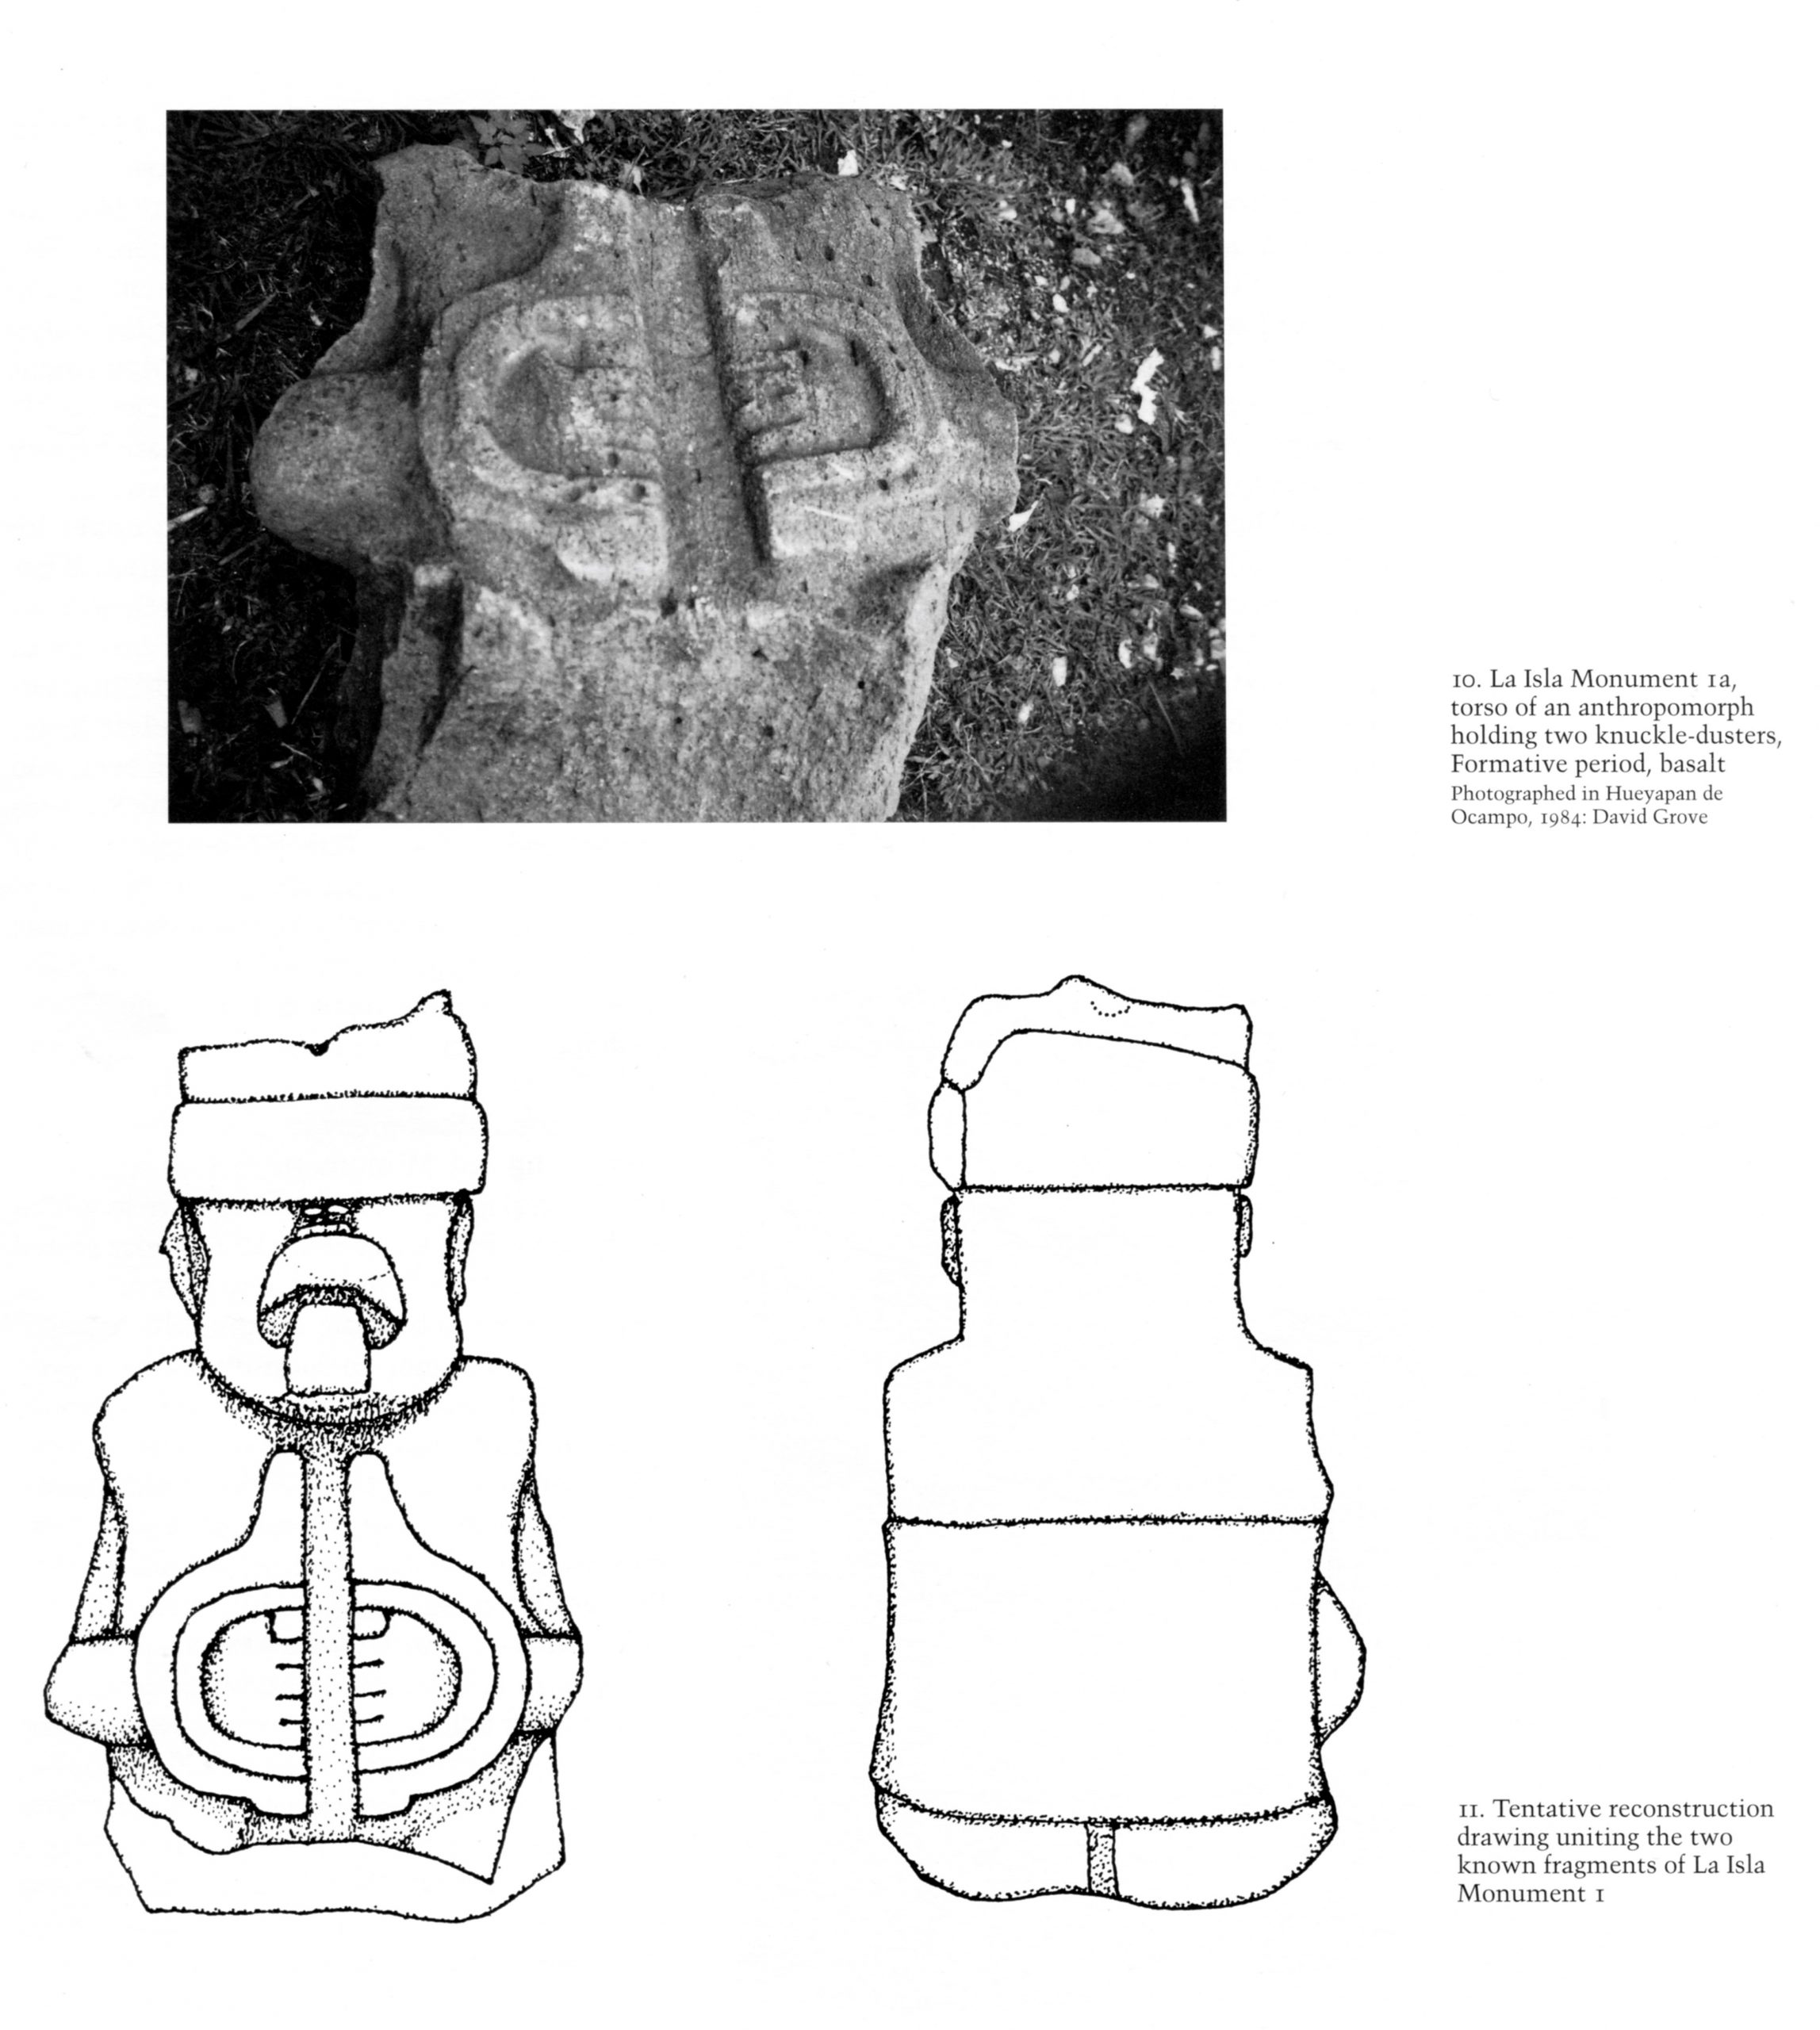 On top is a photograph of the original statue without a head or arms and legs. At the bottom is a pair of sketches showing what the statue would look like with the newly-found head attached.